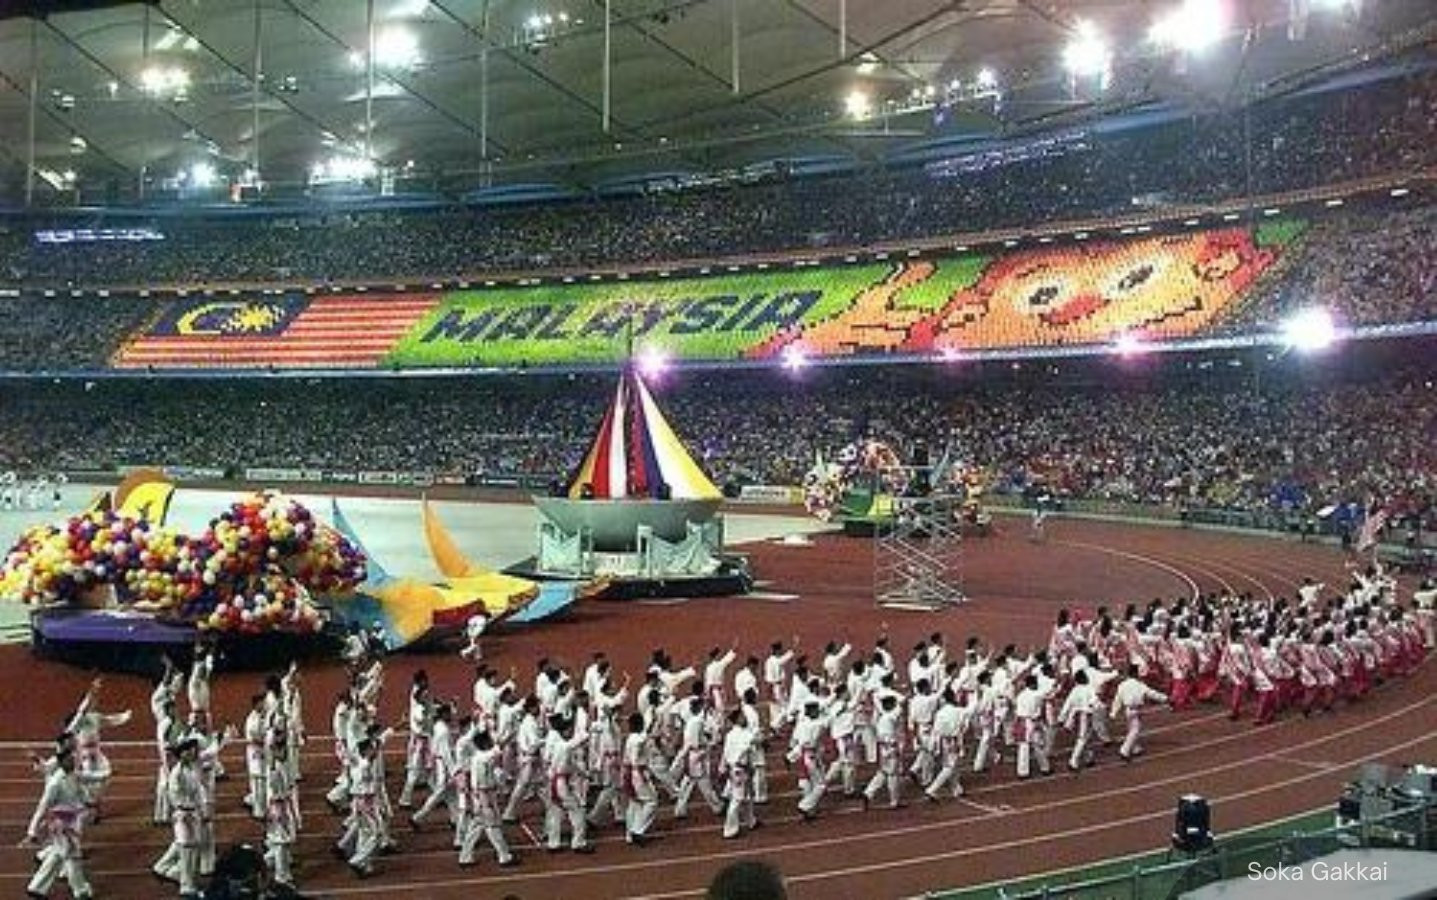 Malaysia has been offered the chance to replace Victoria as the host of the 2026 Commonwealth Games. SOKA GAKKAI